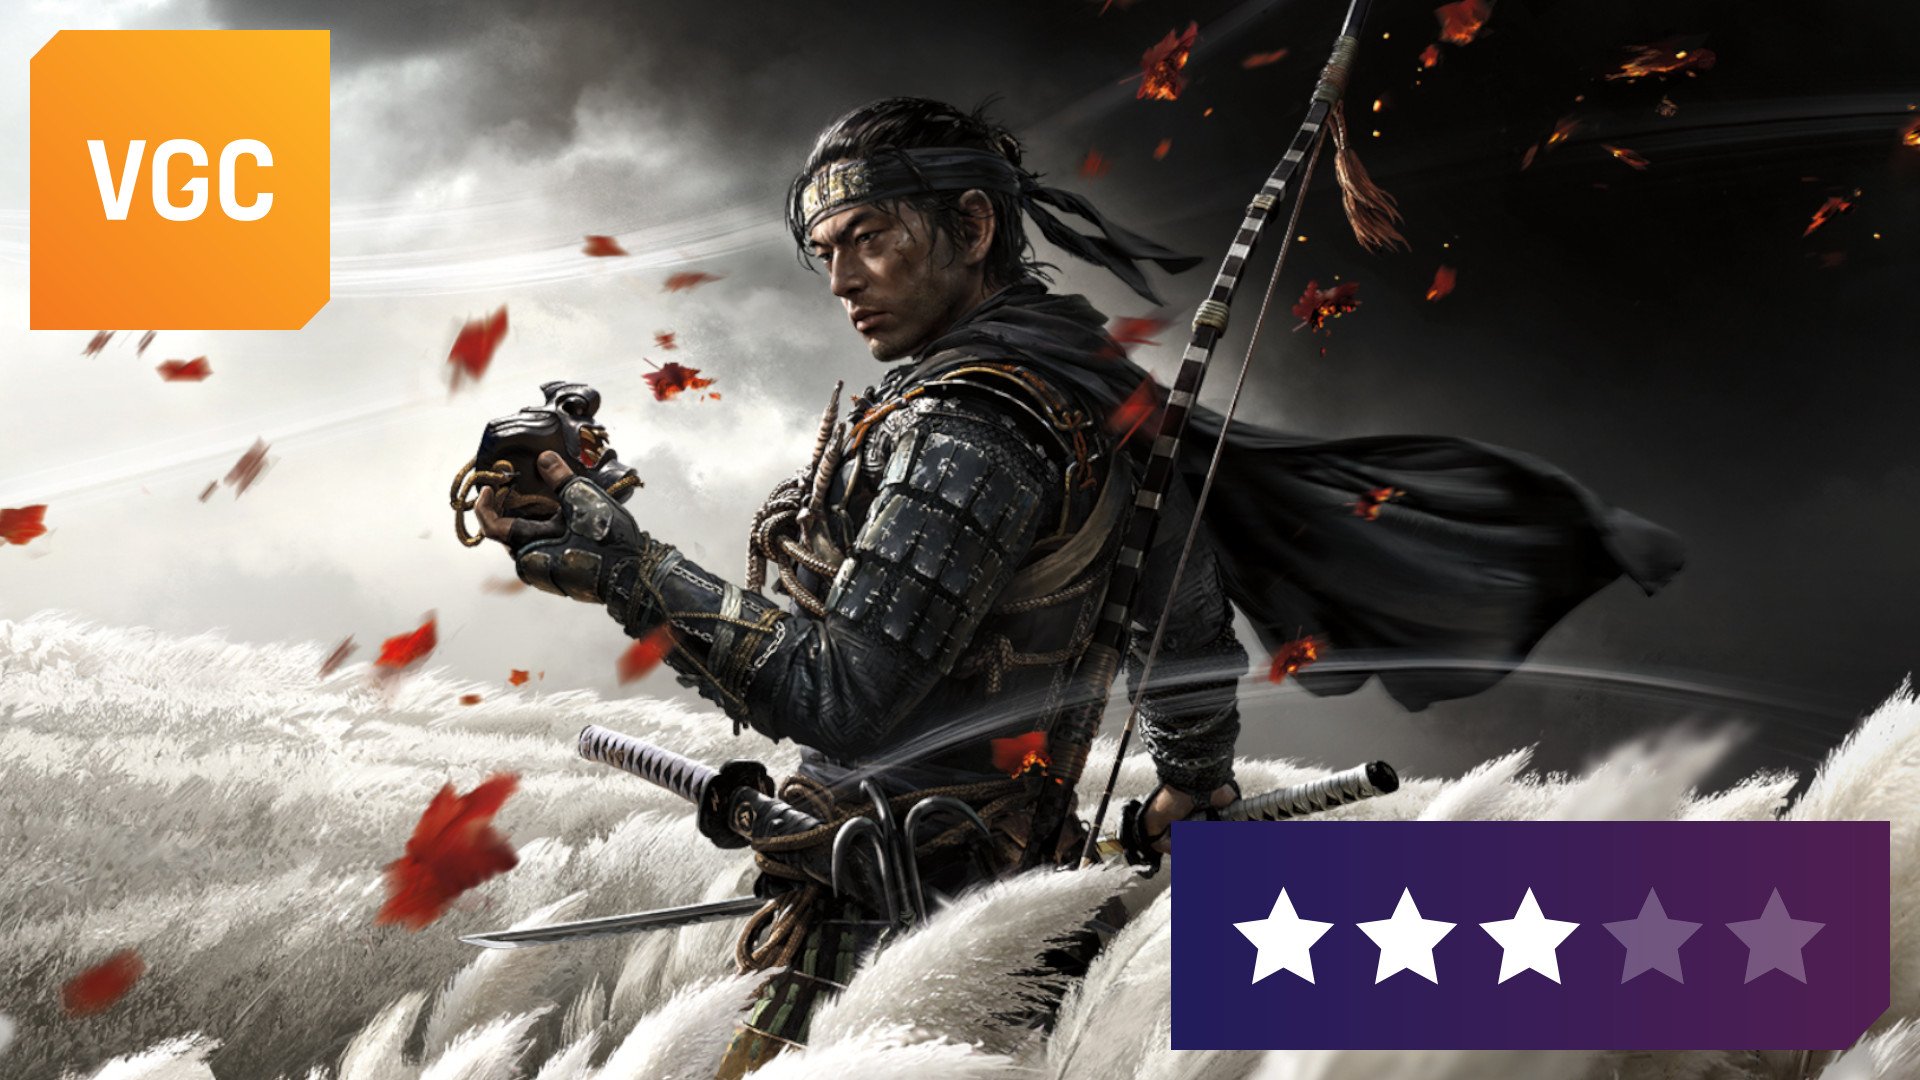 MauroNL on X: (Rumour) Online ad might have revealed Ghost of Tsushima is  heading to Steam on February 7, 2022. This coincides with the infamous  Geforce Now leak, which also indicated the